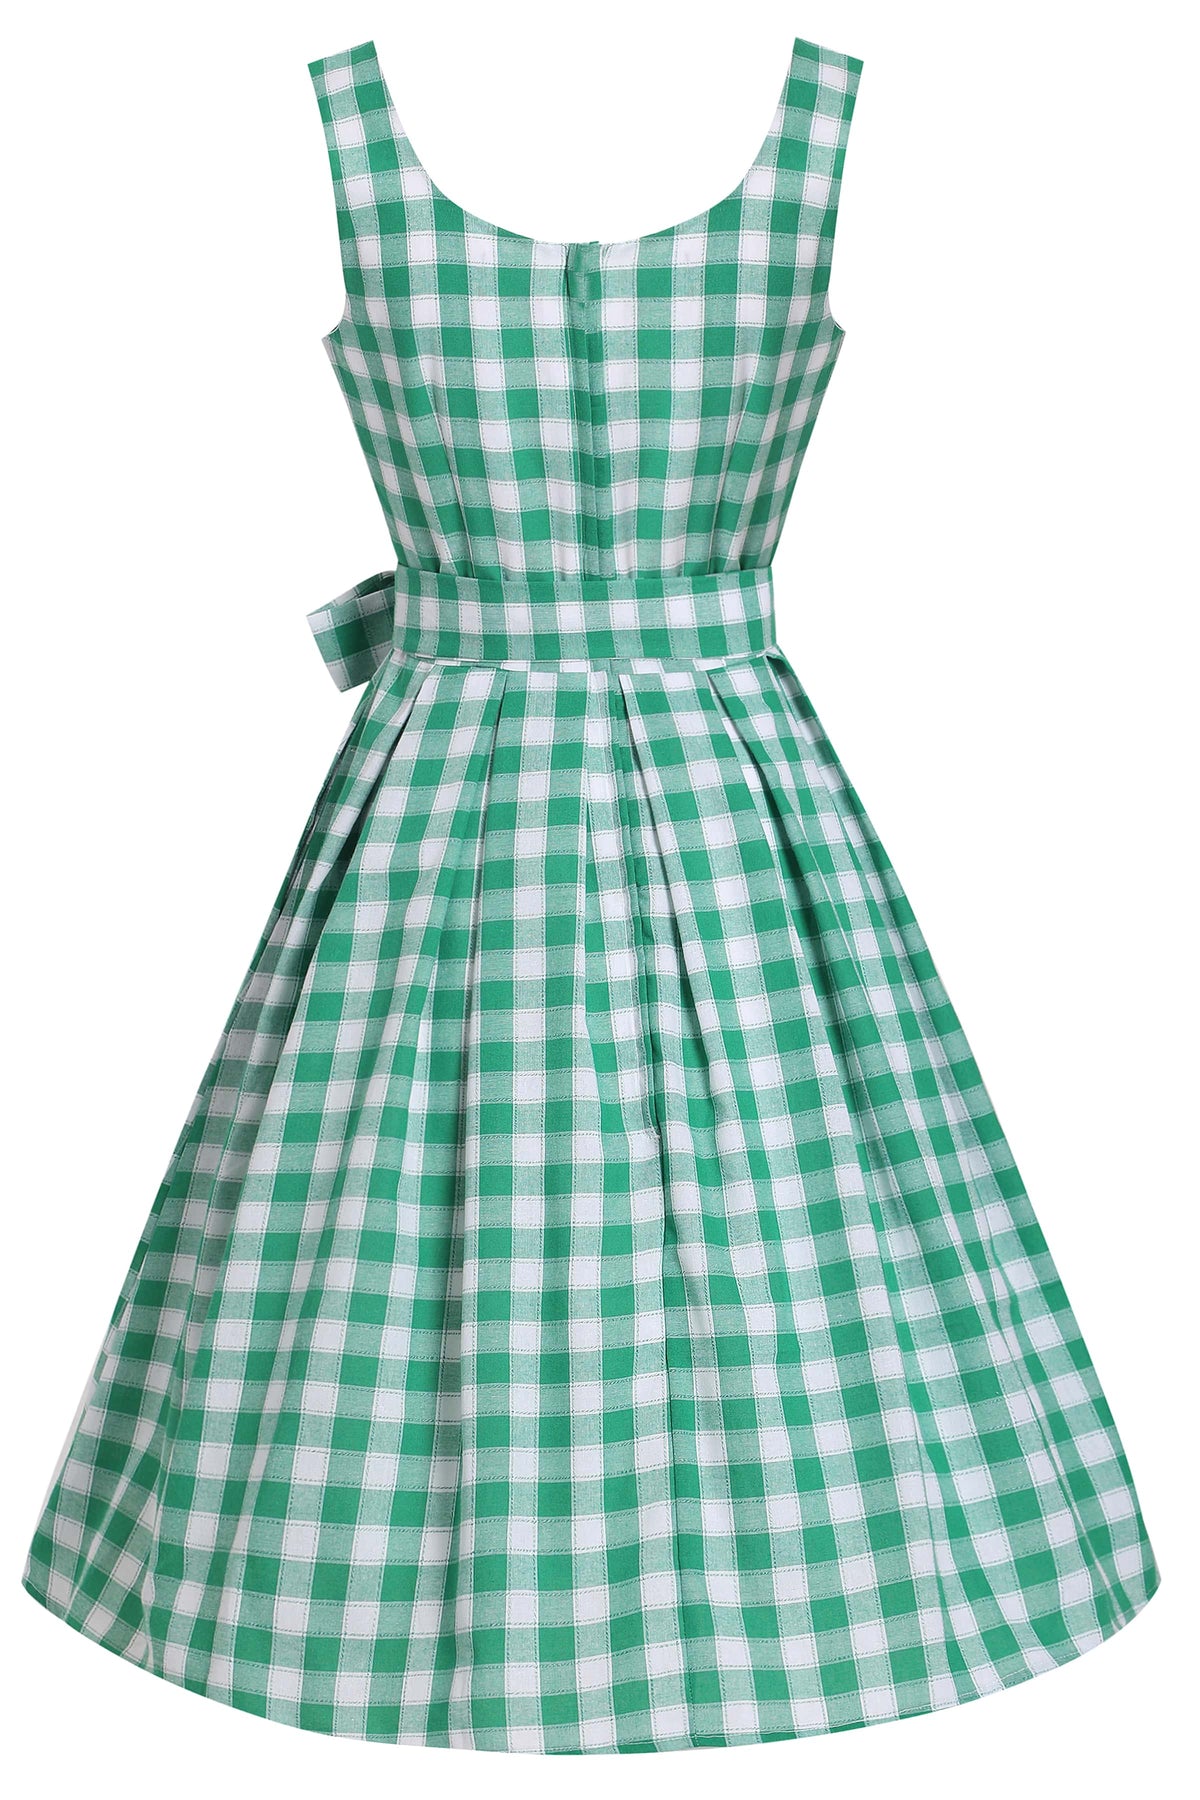 Amanda Green Gingham 1950's Fit and Flared Dress